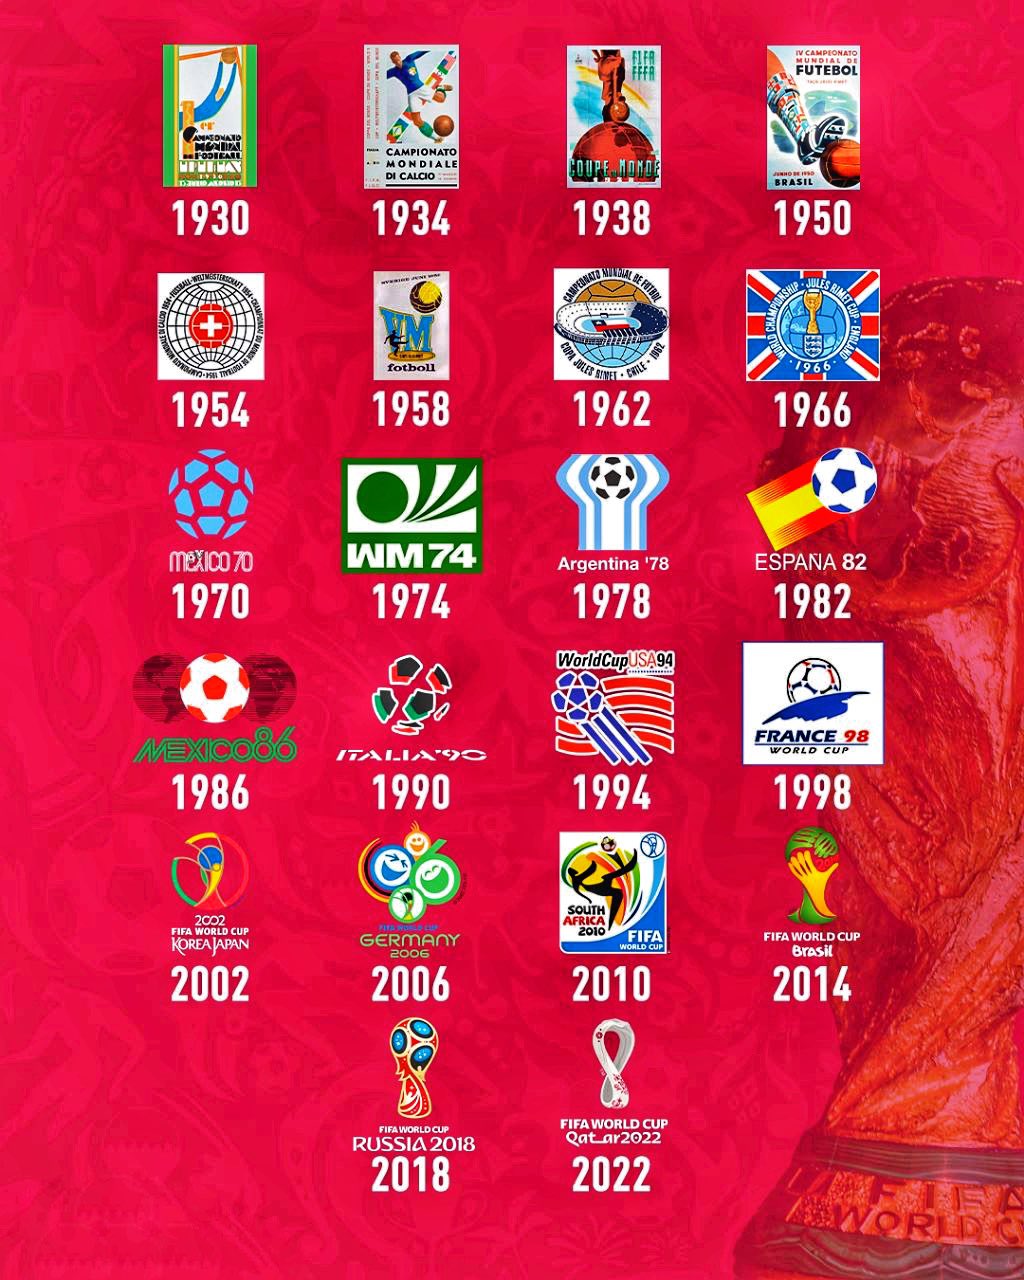 FIFA World Cup logos through the years (1954-2022)